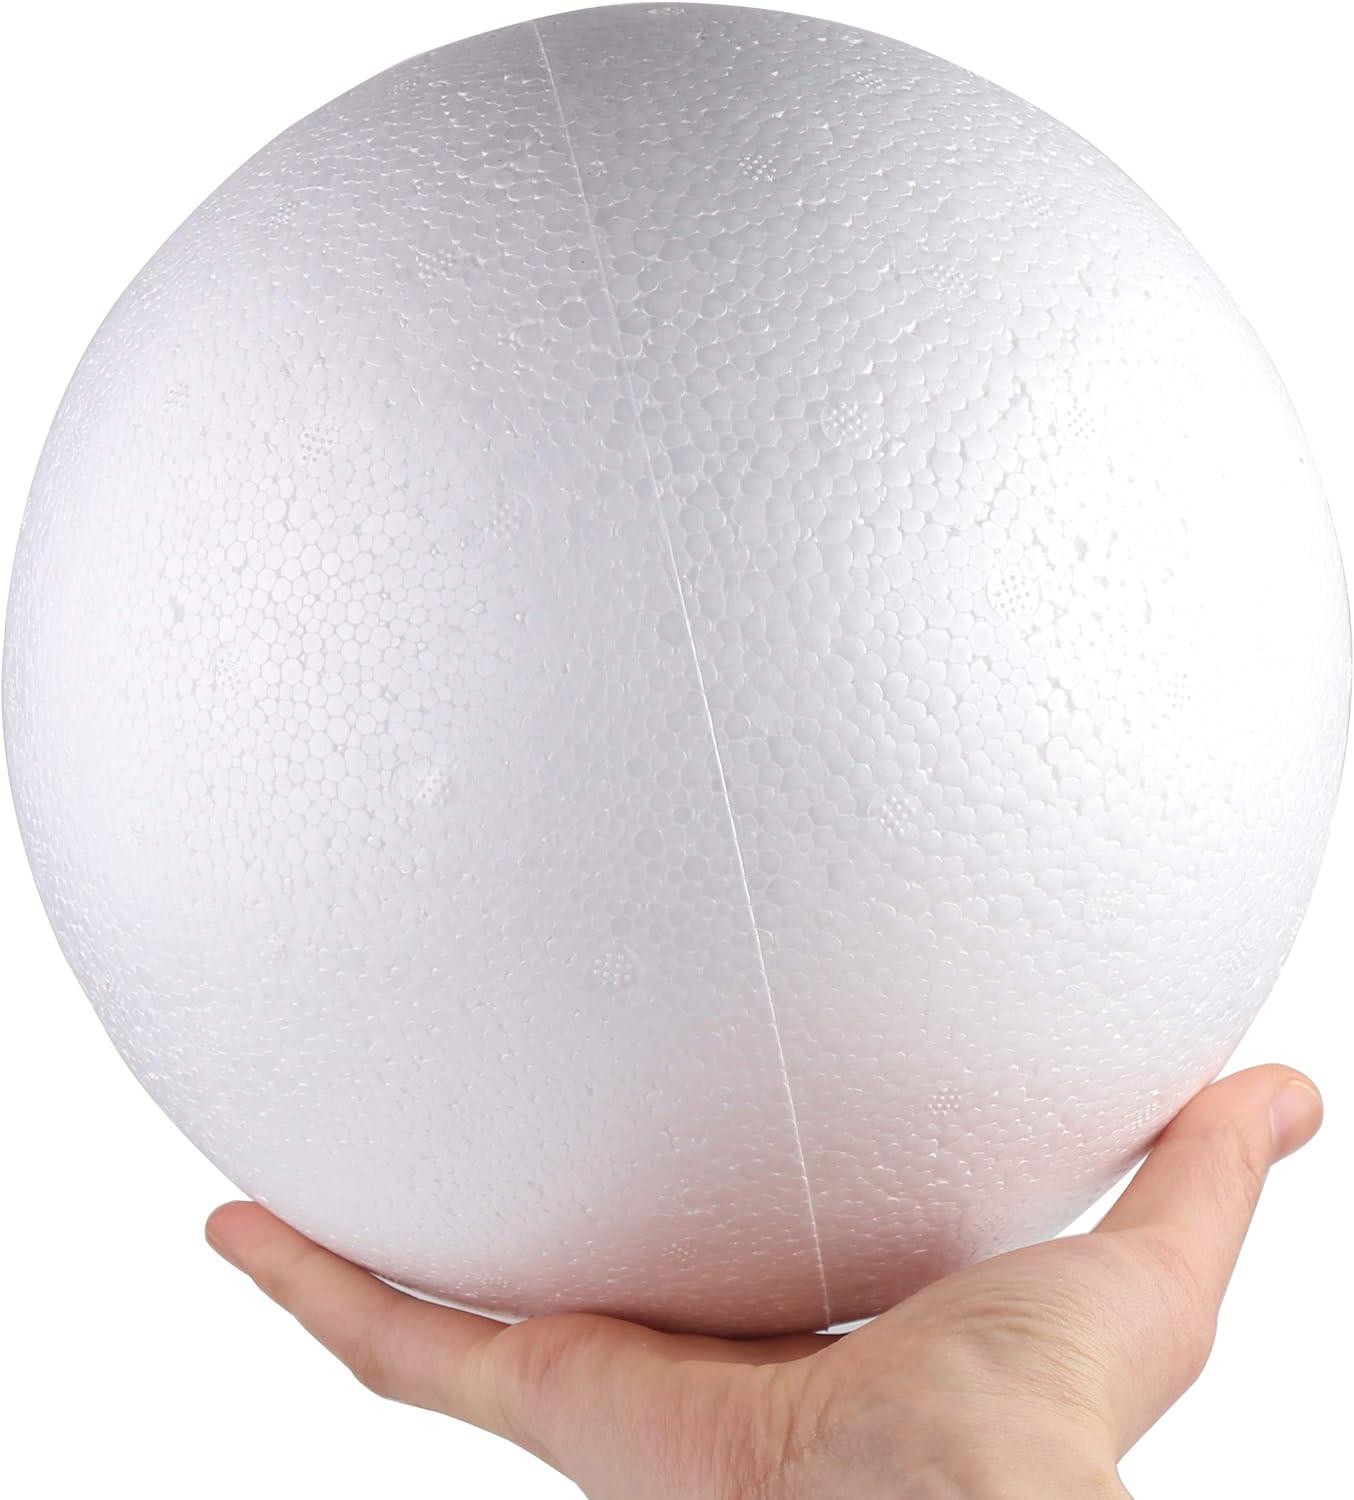 DIYASY 8 Large White Foam Balls 2 Pack Giant Foam Balls Smooth Solid Craft  Balls for Christmas DIY Ornaments. 8 Inch 2pcs